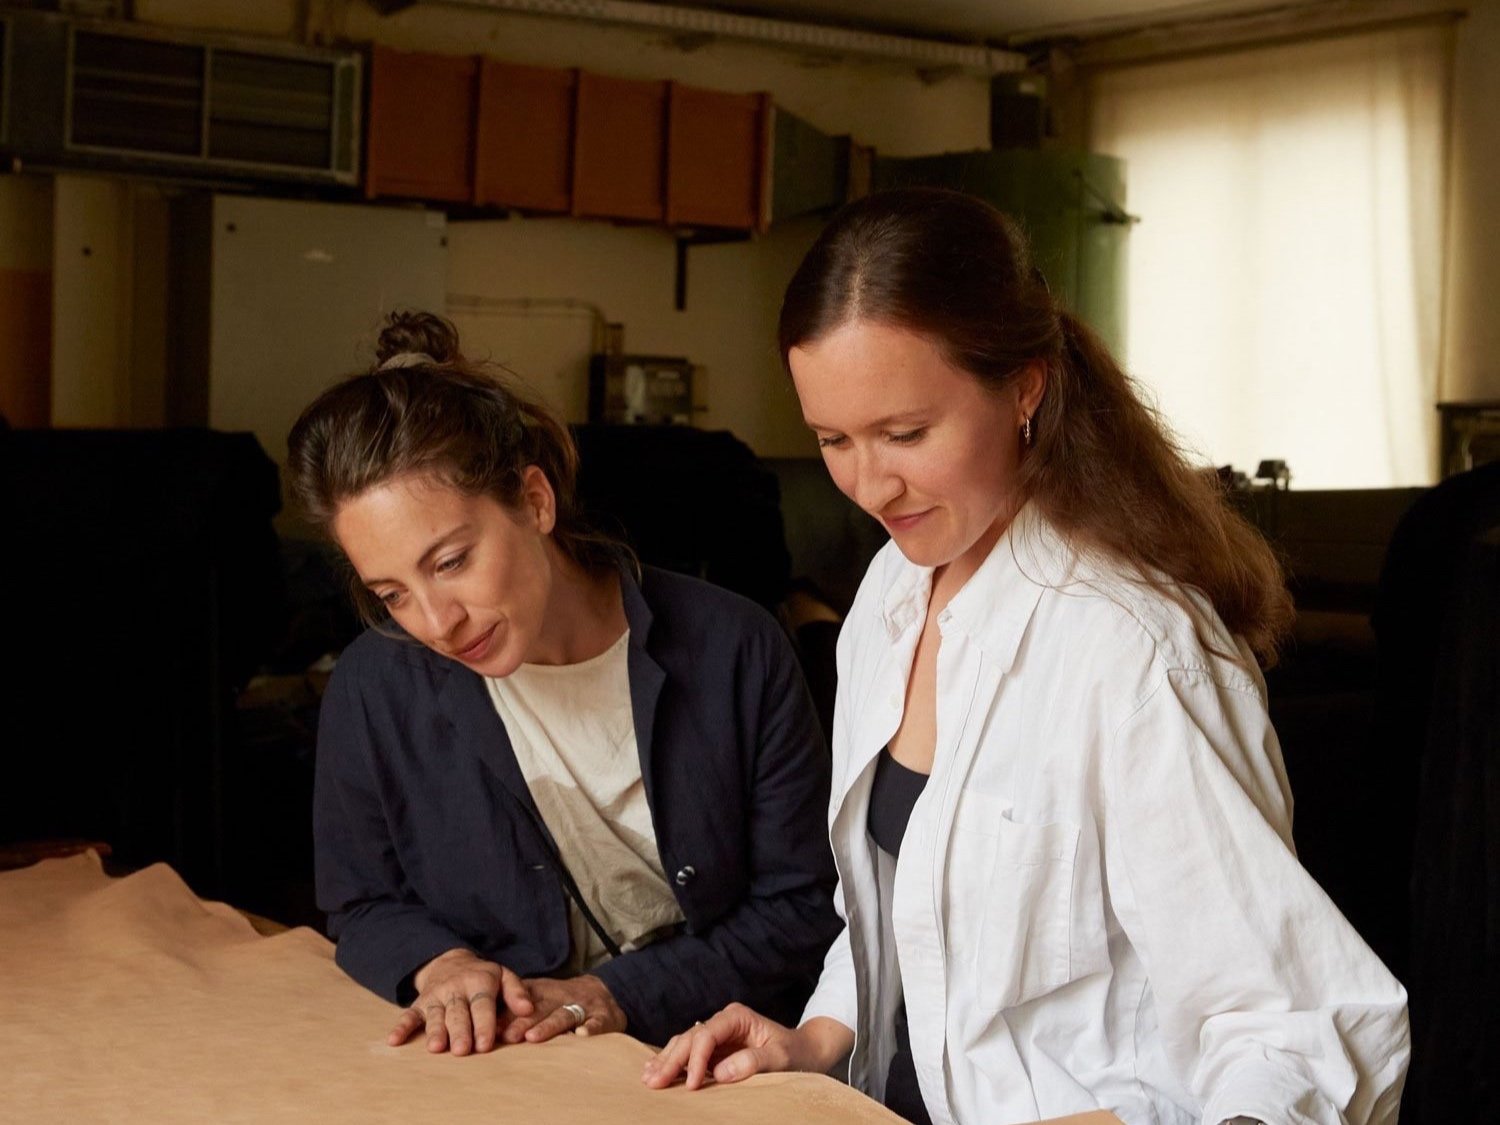 The future of leather goods - Alicia and Nina in conversation with VORN